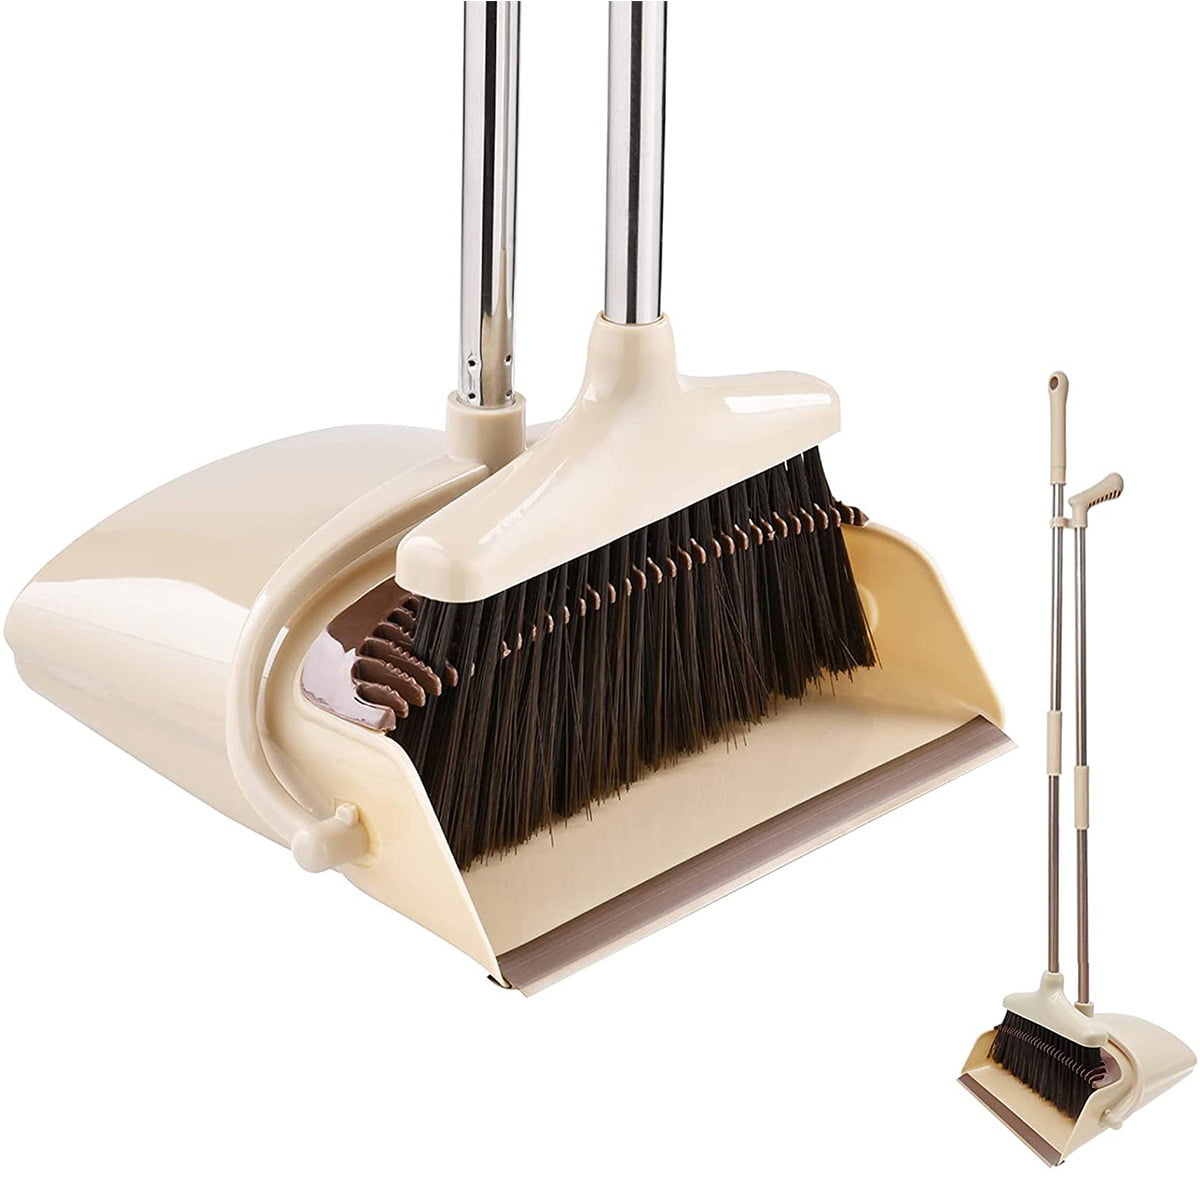 50 Long Handle Broom and Dust Pan with Long Handle Beige Broom and Dustpan Set Standing Upright Grips Sweep Set with Lobby Broom Combo Set for Home and Office 